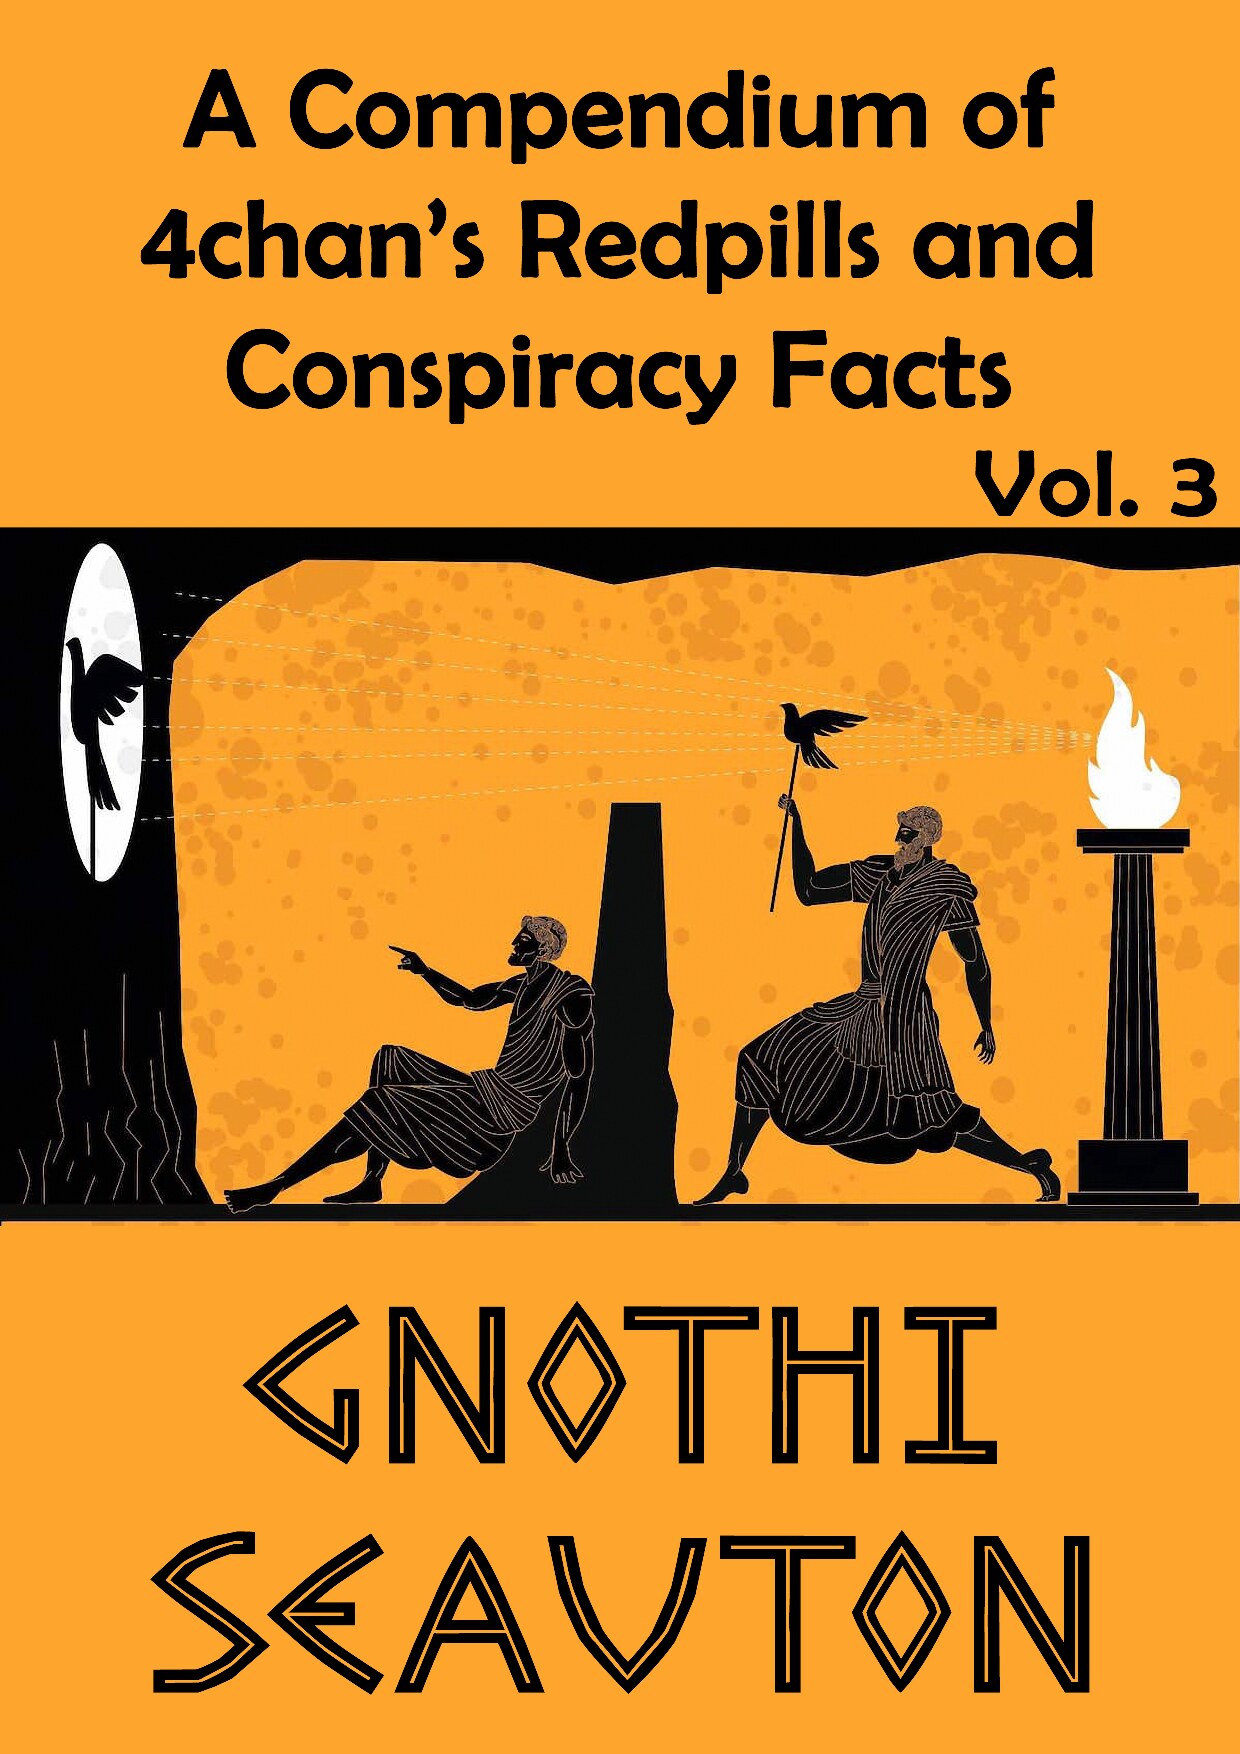 A Compendium of 4chan's Redpills and Conspiracy Facts (Vol. 3)